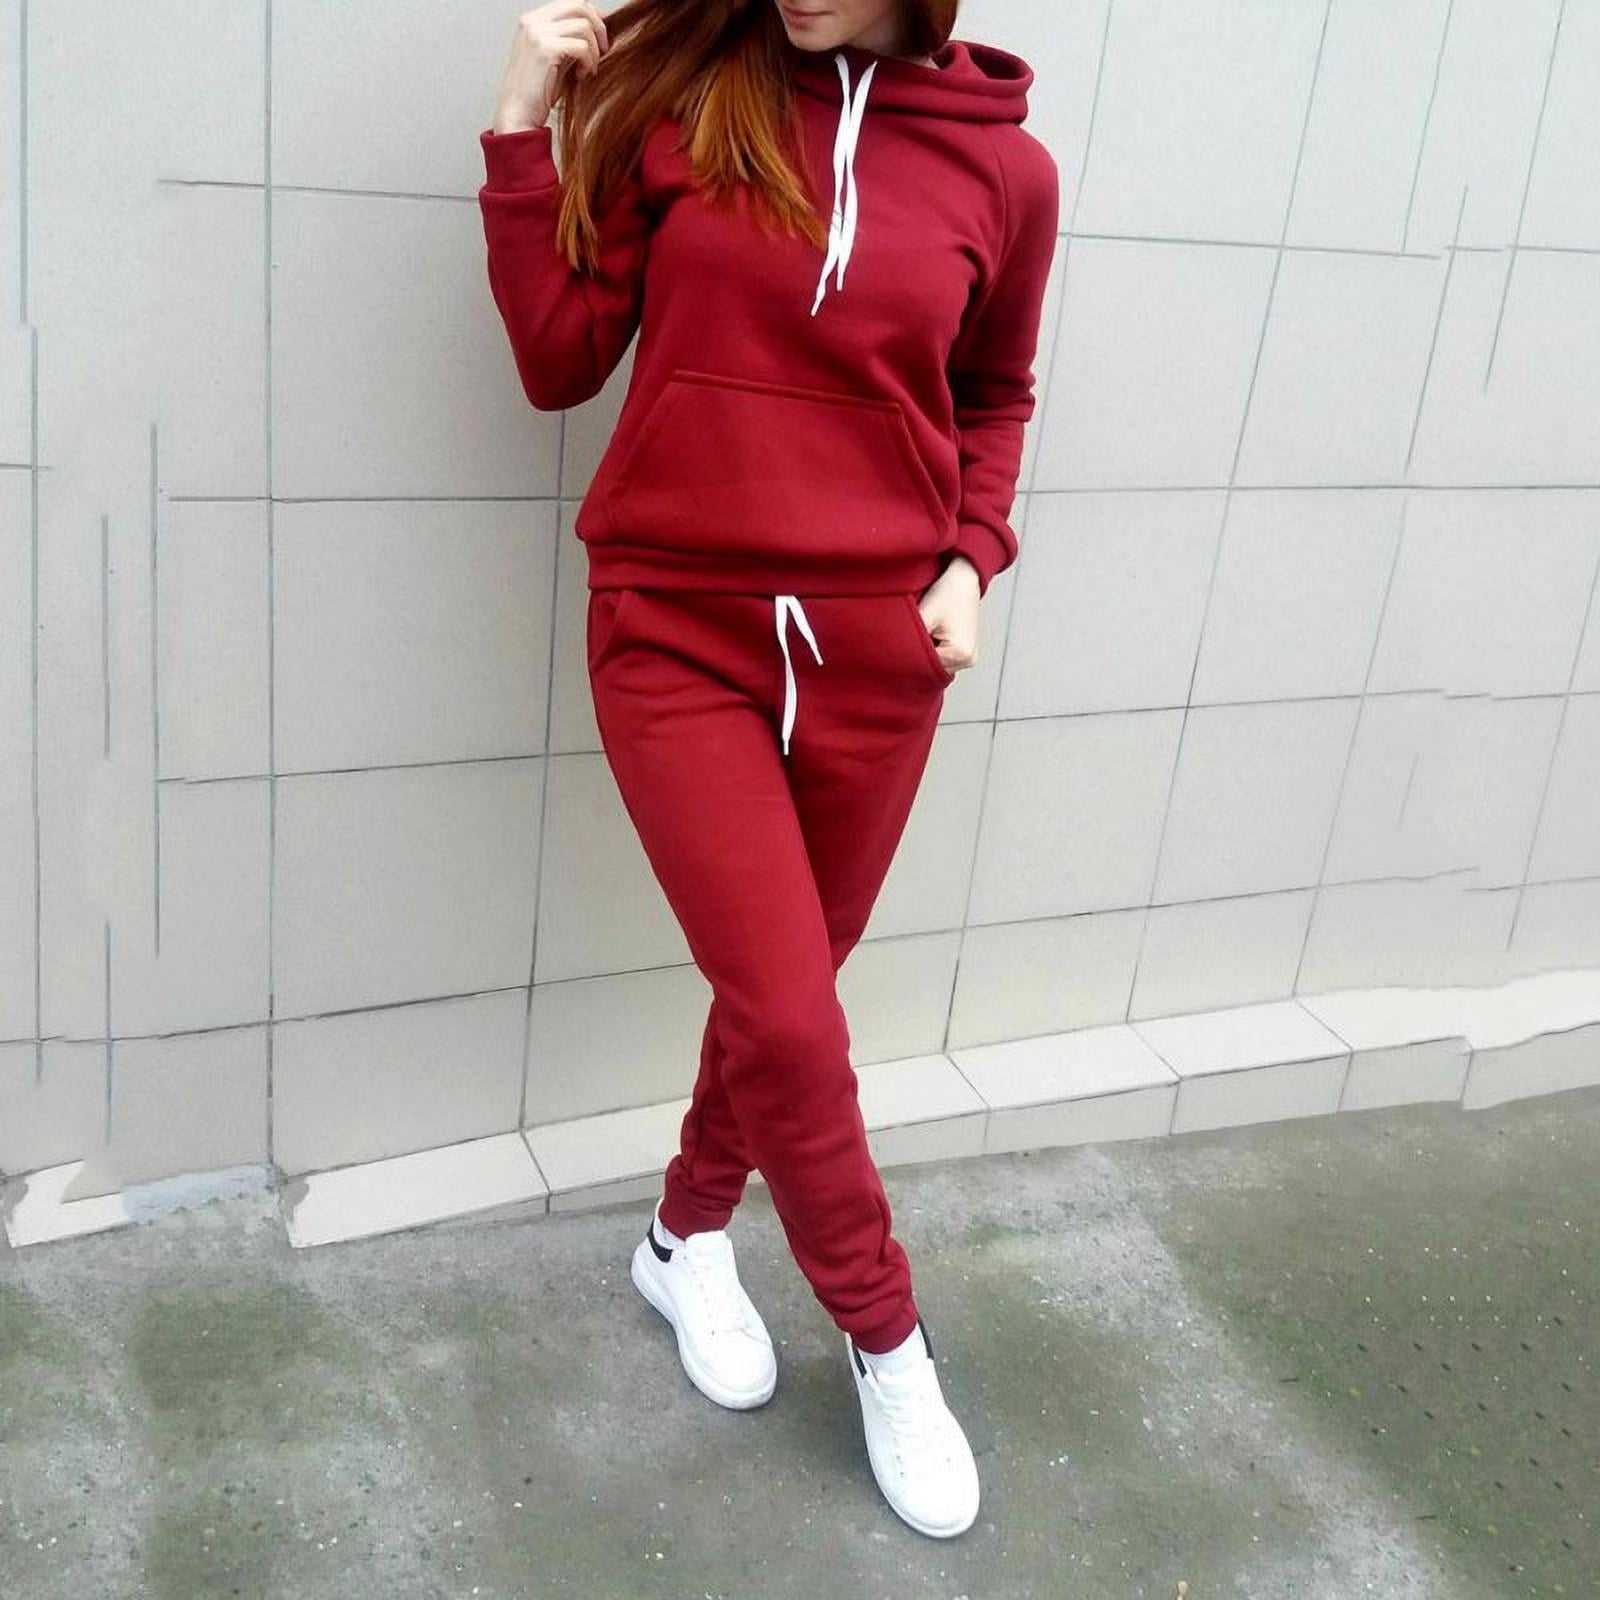 HOTSUIT Sauna Suit Women Weight Loss Boxing Gym Sweat Suits Workout Jacket,  Rose Red, M : Amazon.in: Fashion